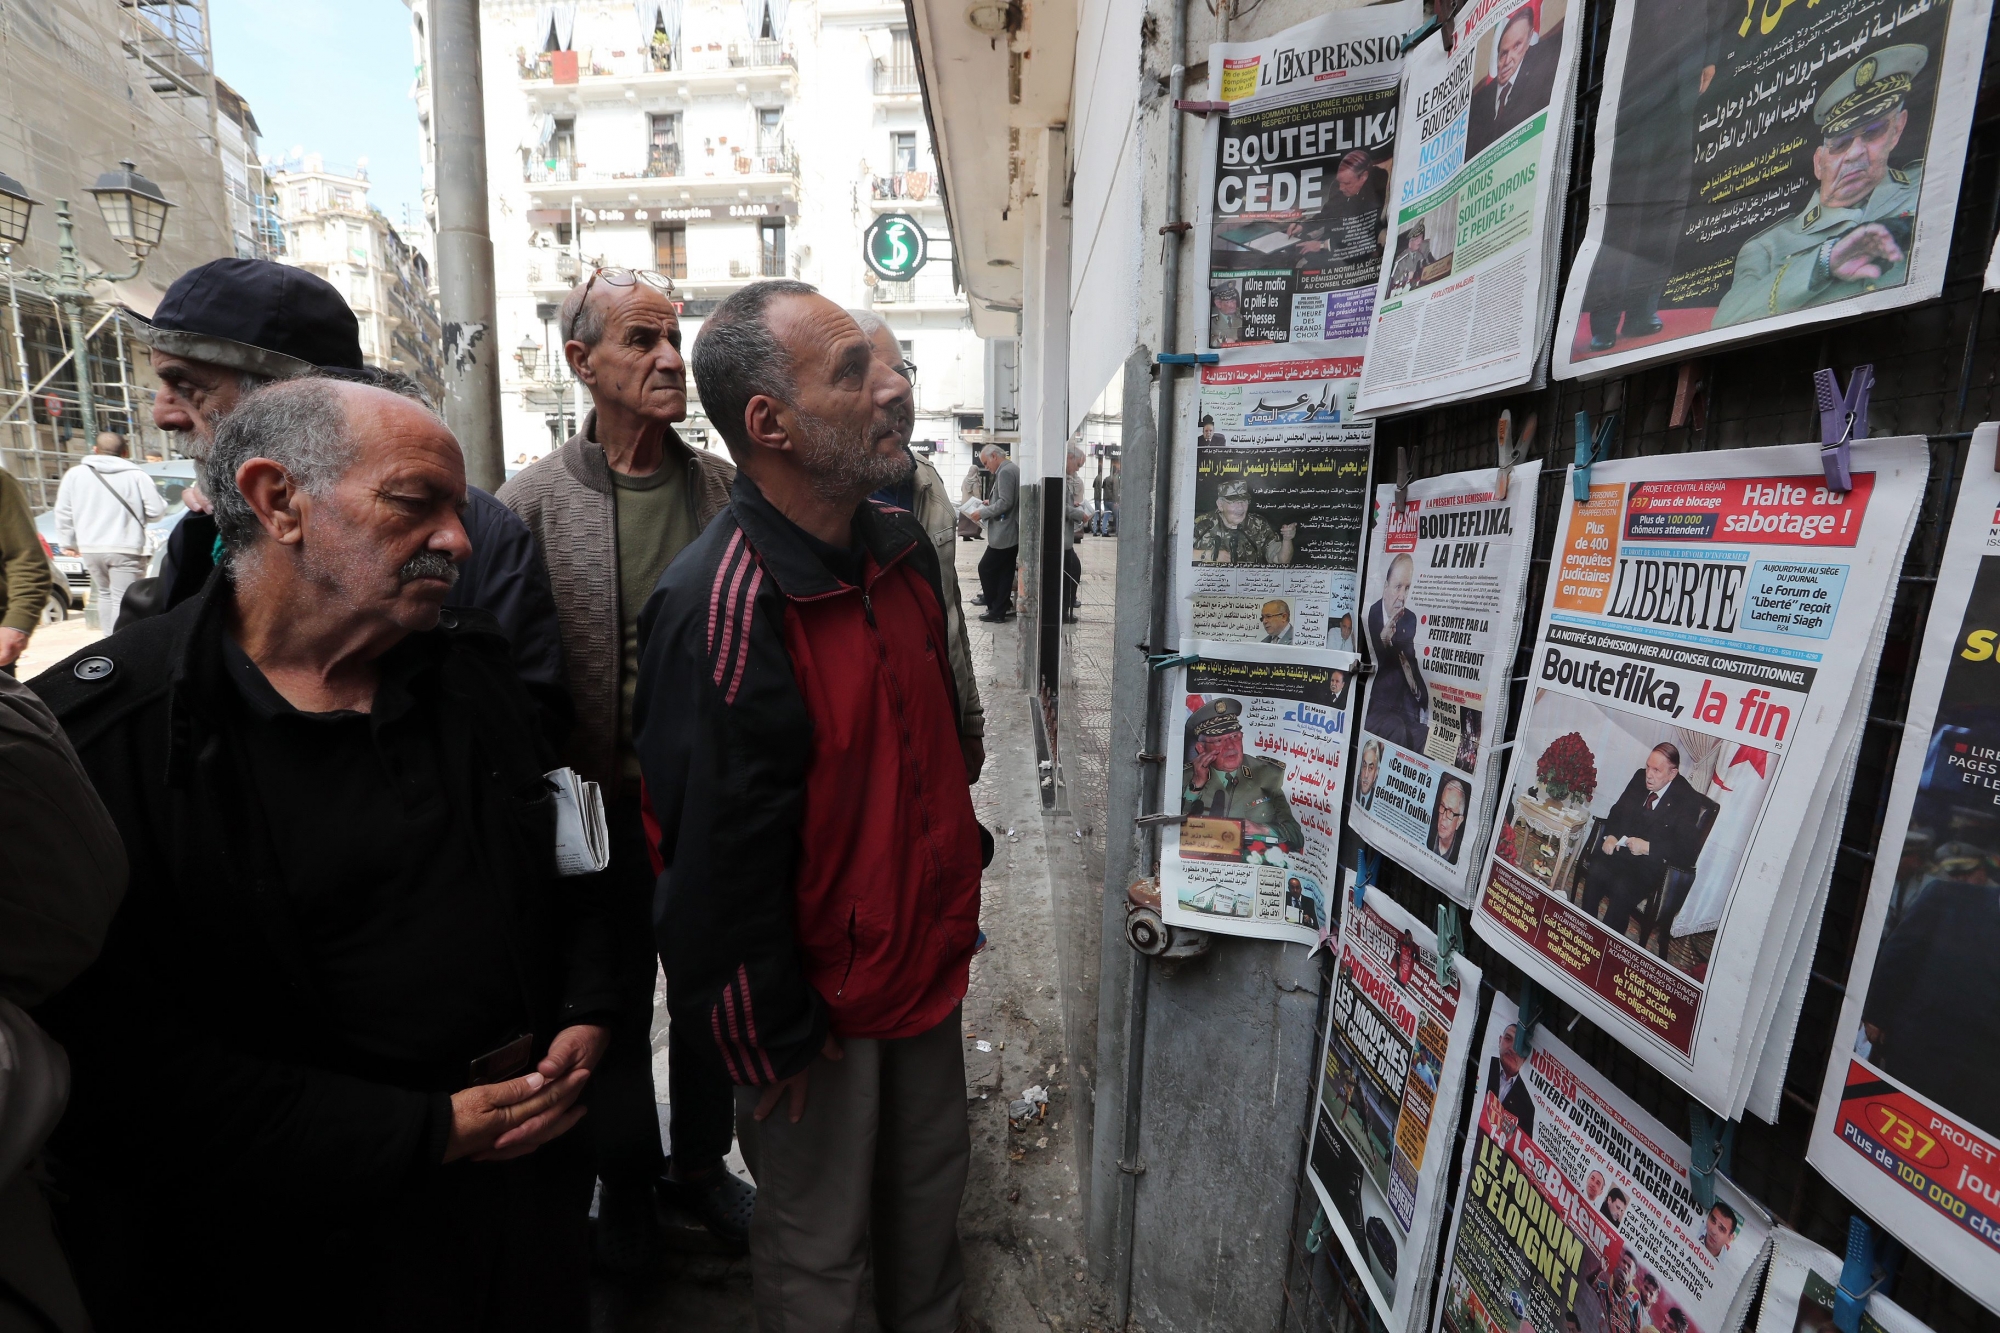 epa07482356 Algerian men look at local newspapers a day after Algeria's President Abdelaziz Bouteflika submitted his resignation, in Algiers, Algeria, 03 April 2019. According to official media reports late 02 April 2019, Bouteflika has announced his resignation, after weeks of popular mobilization against his rule and his intention to run for a fifth term in the upcoming presidential elections. Mr. Bouteflika withdrew from running for a new term but canceled Algeria's presidential election, which had been set for April 18.  EPA/MOHAMED MESSARA ALGERIA POLITICAL CRISIS